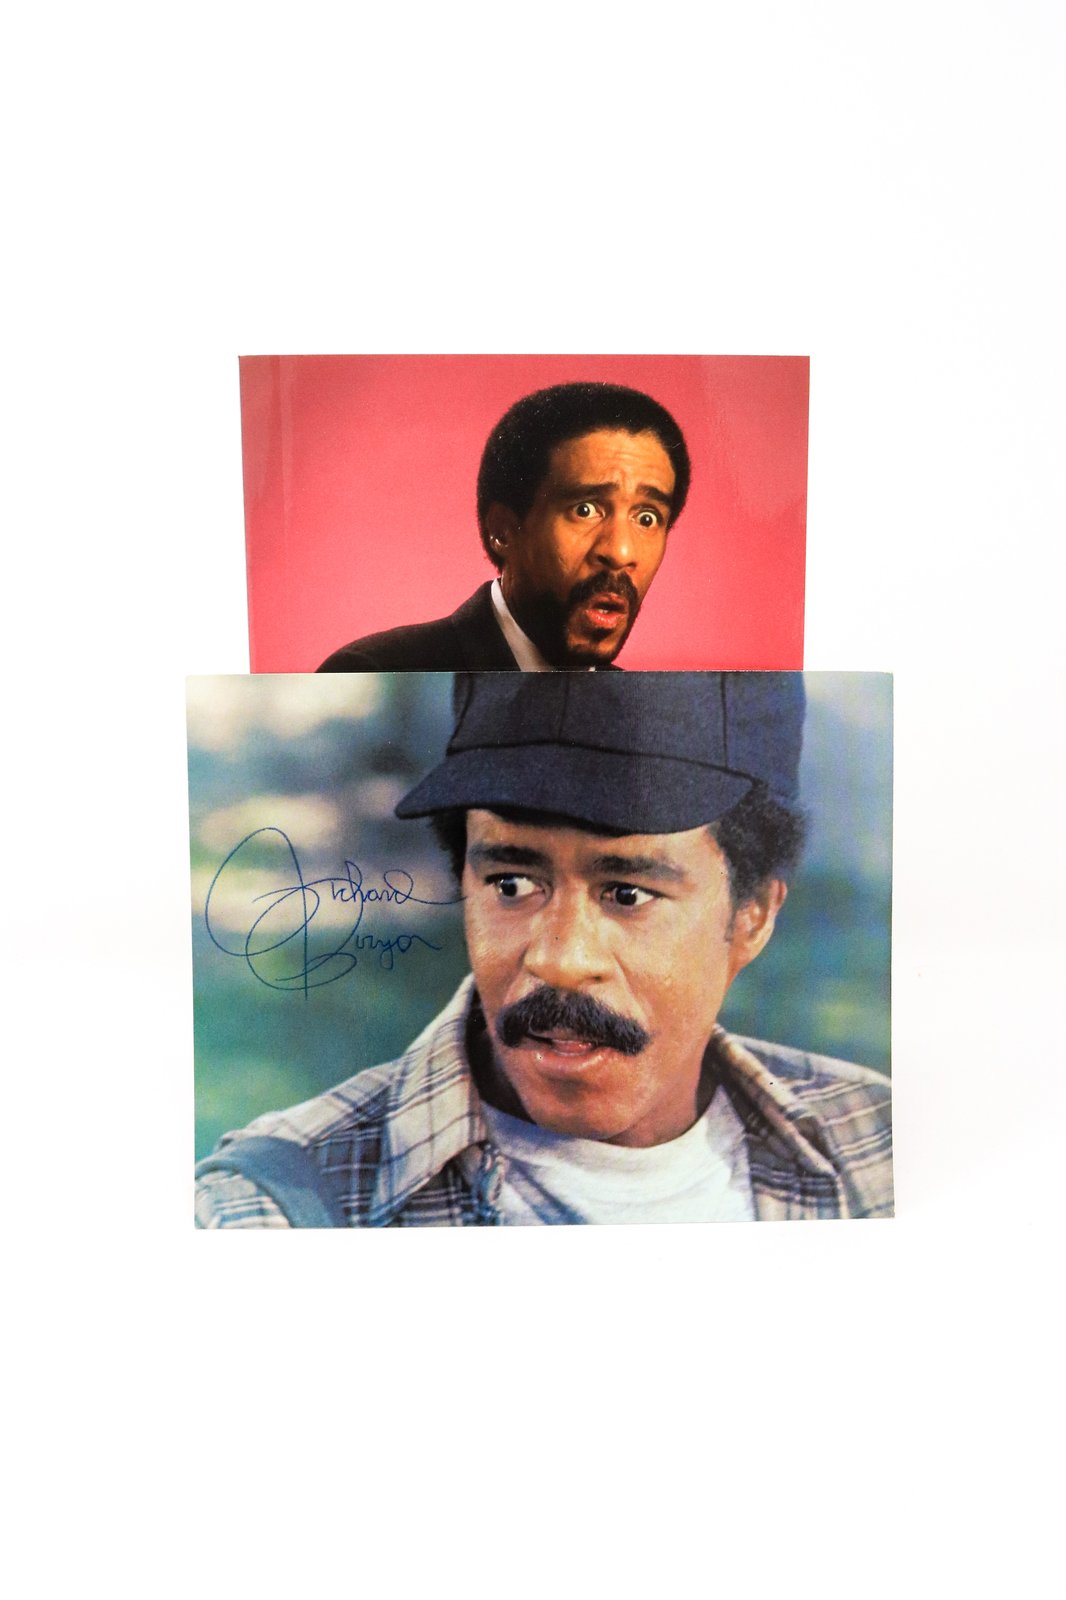 convictions by richard pryor